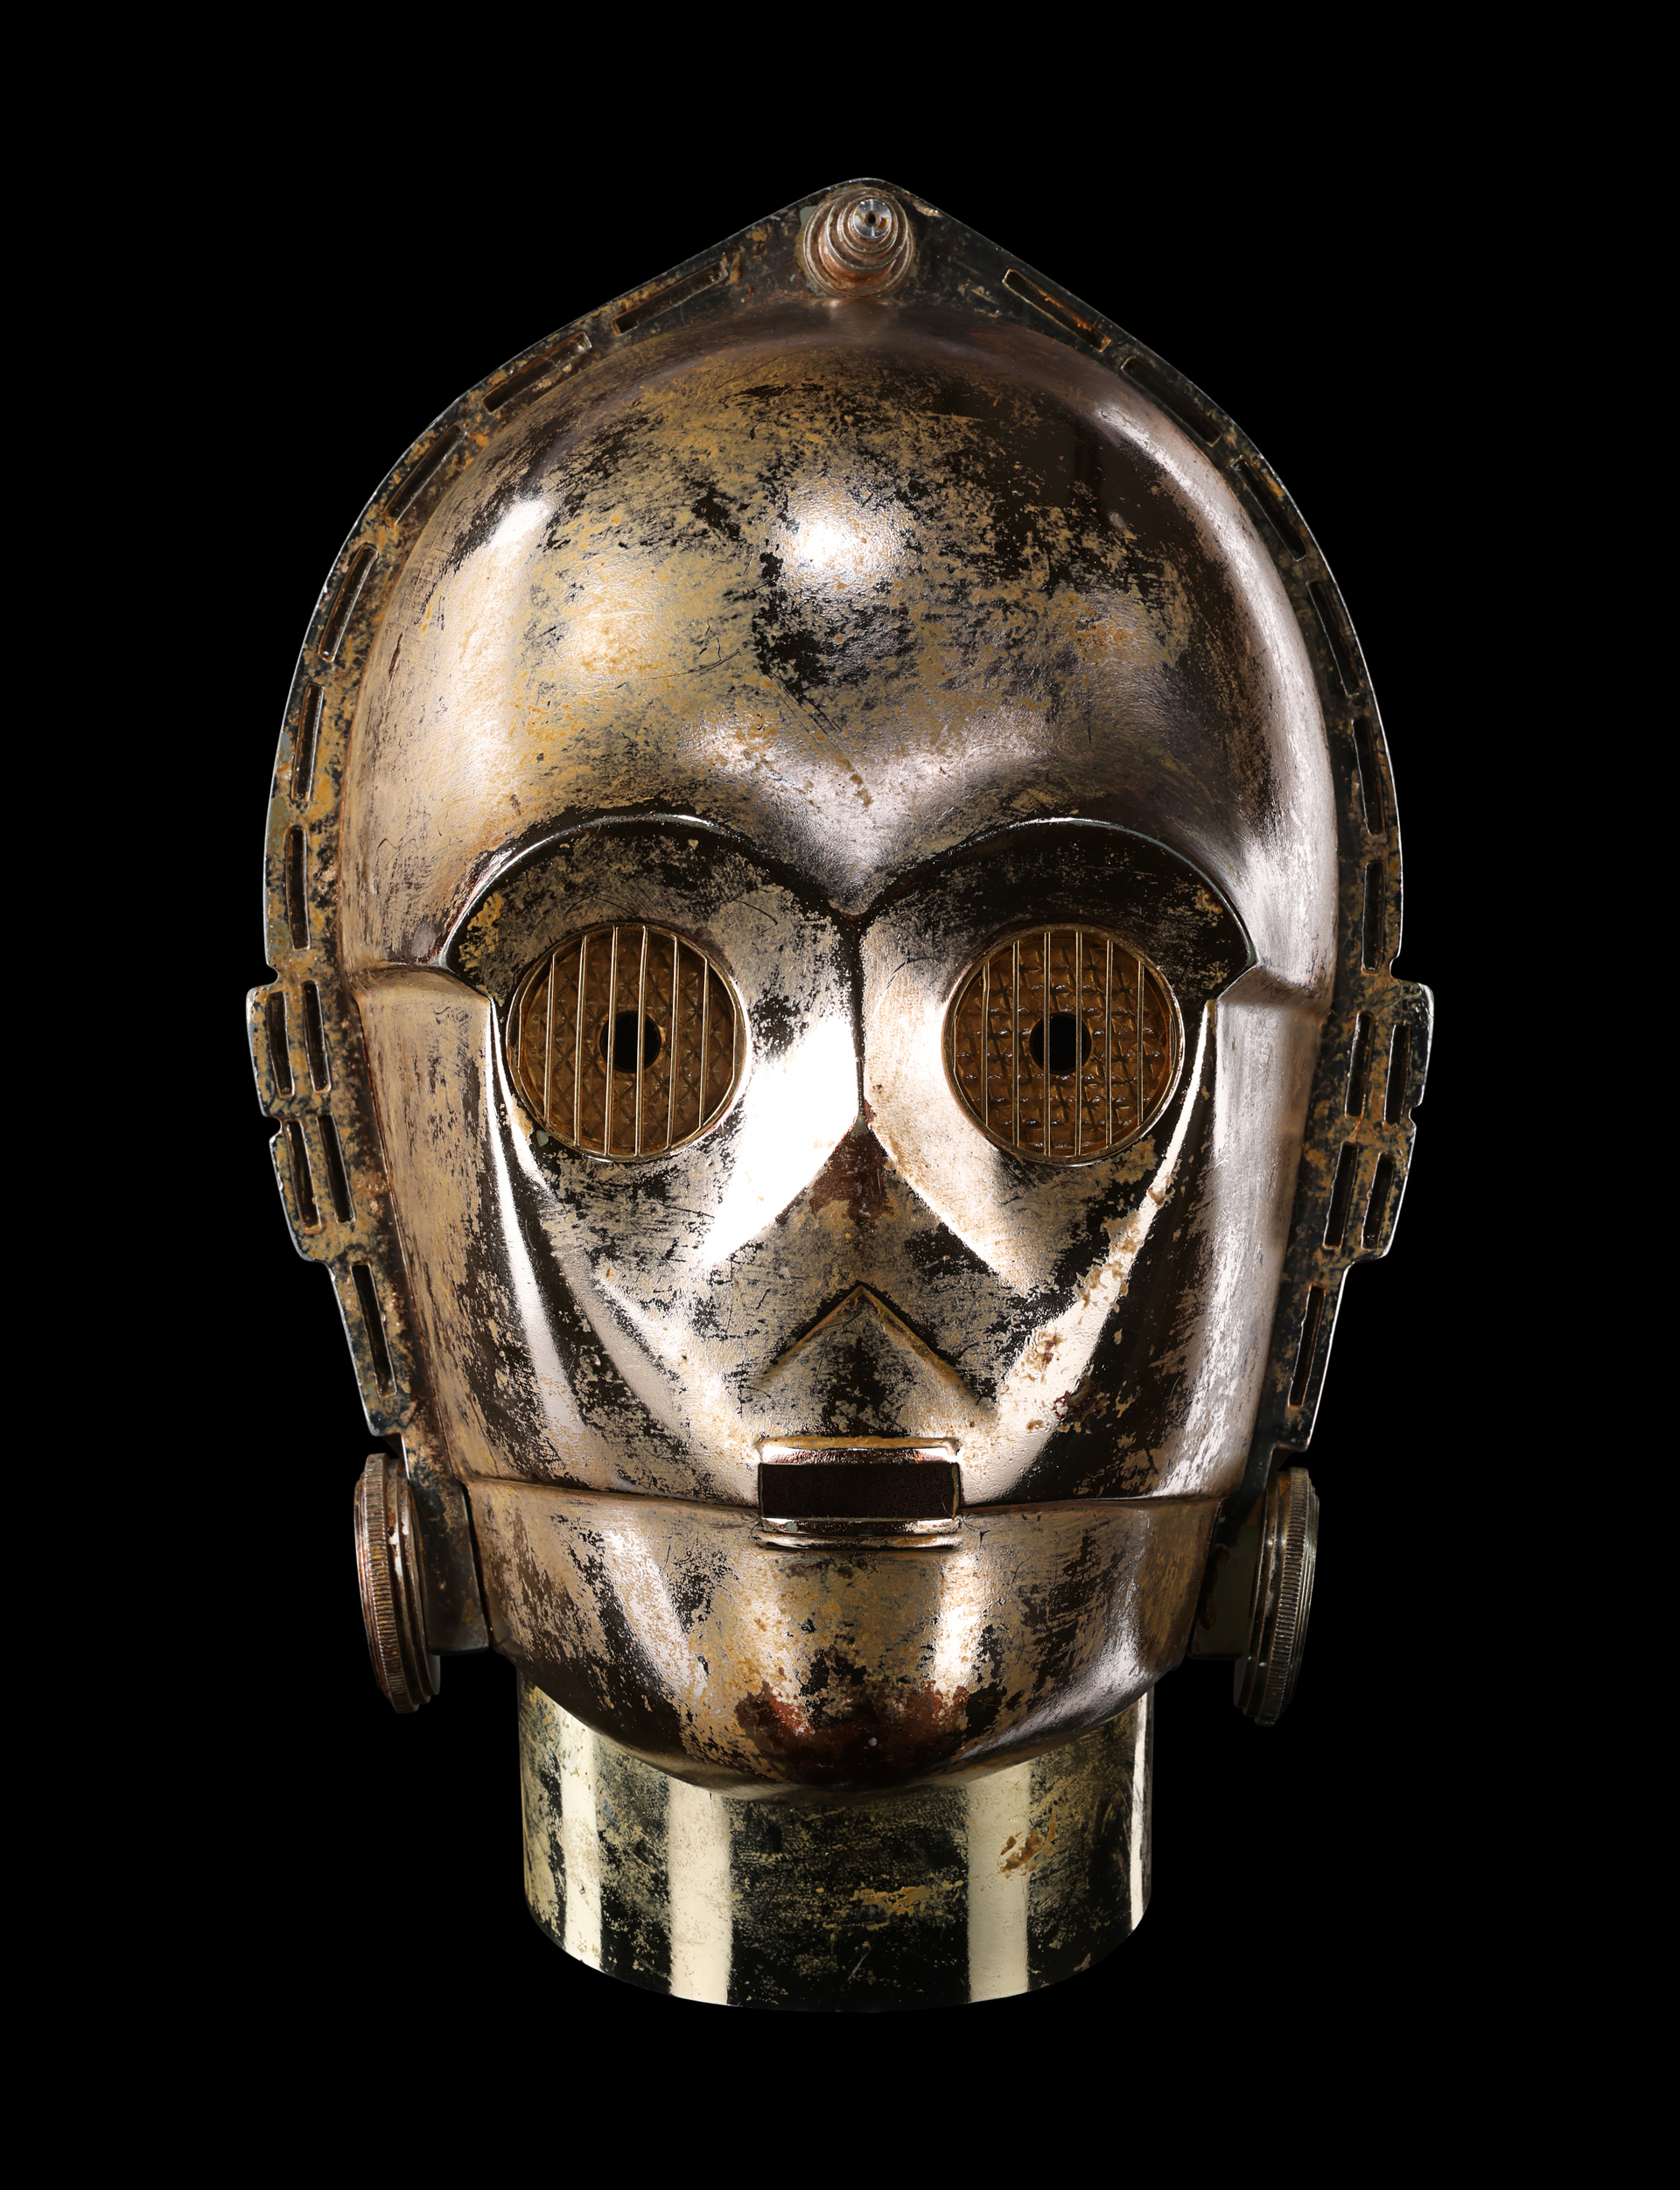 STAR WARS: RETURN OF THE JEDI (1983) - Anthony Daniels Collection: Screen-matched Light-up C-3PO (An - Image 16 of 45